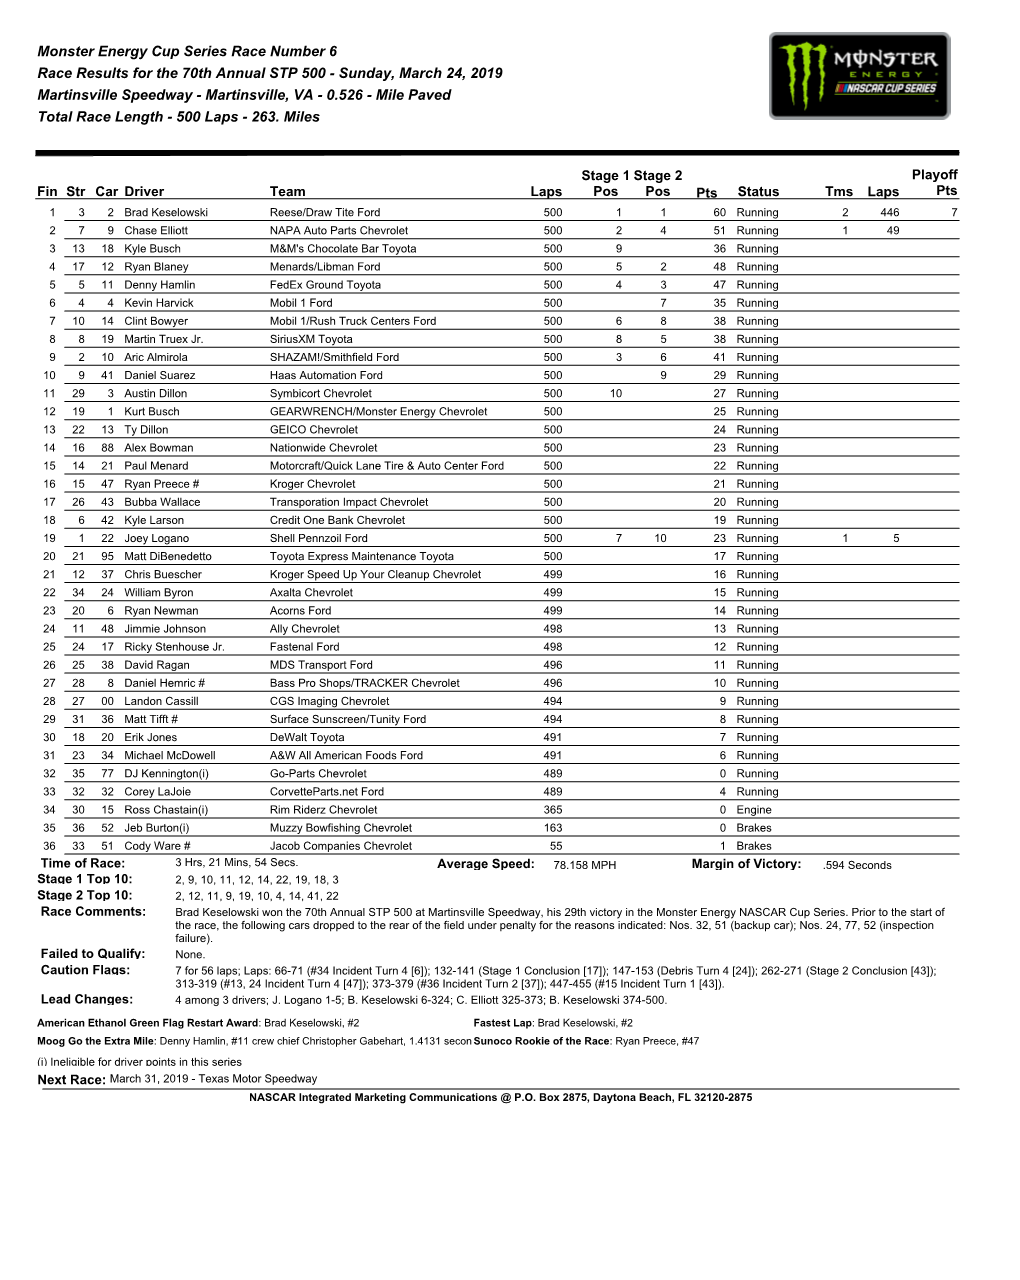 Race Results for the 70Th Annual STP 500 - Sunday, March 24, 2019 Martinsville Speedway - Martinsville, VA - 0.526 - Mile Paved Total Race Length - 500 Laps - 263